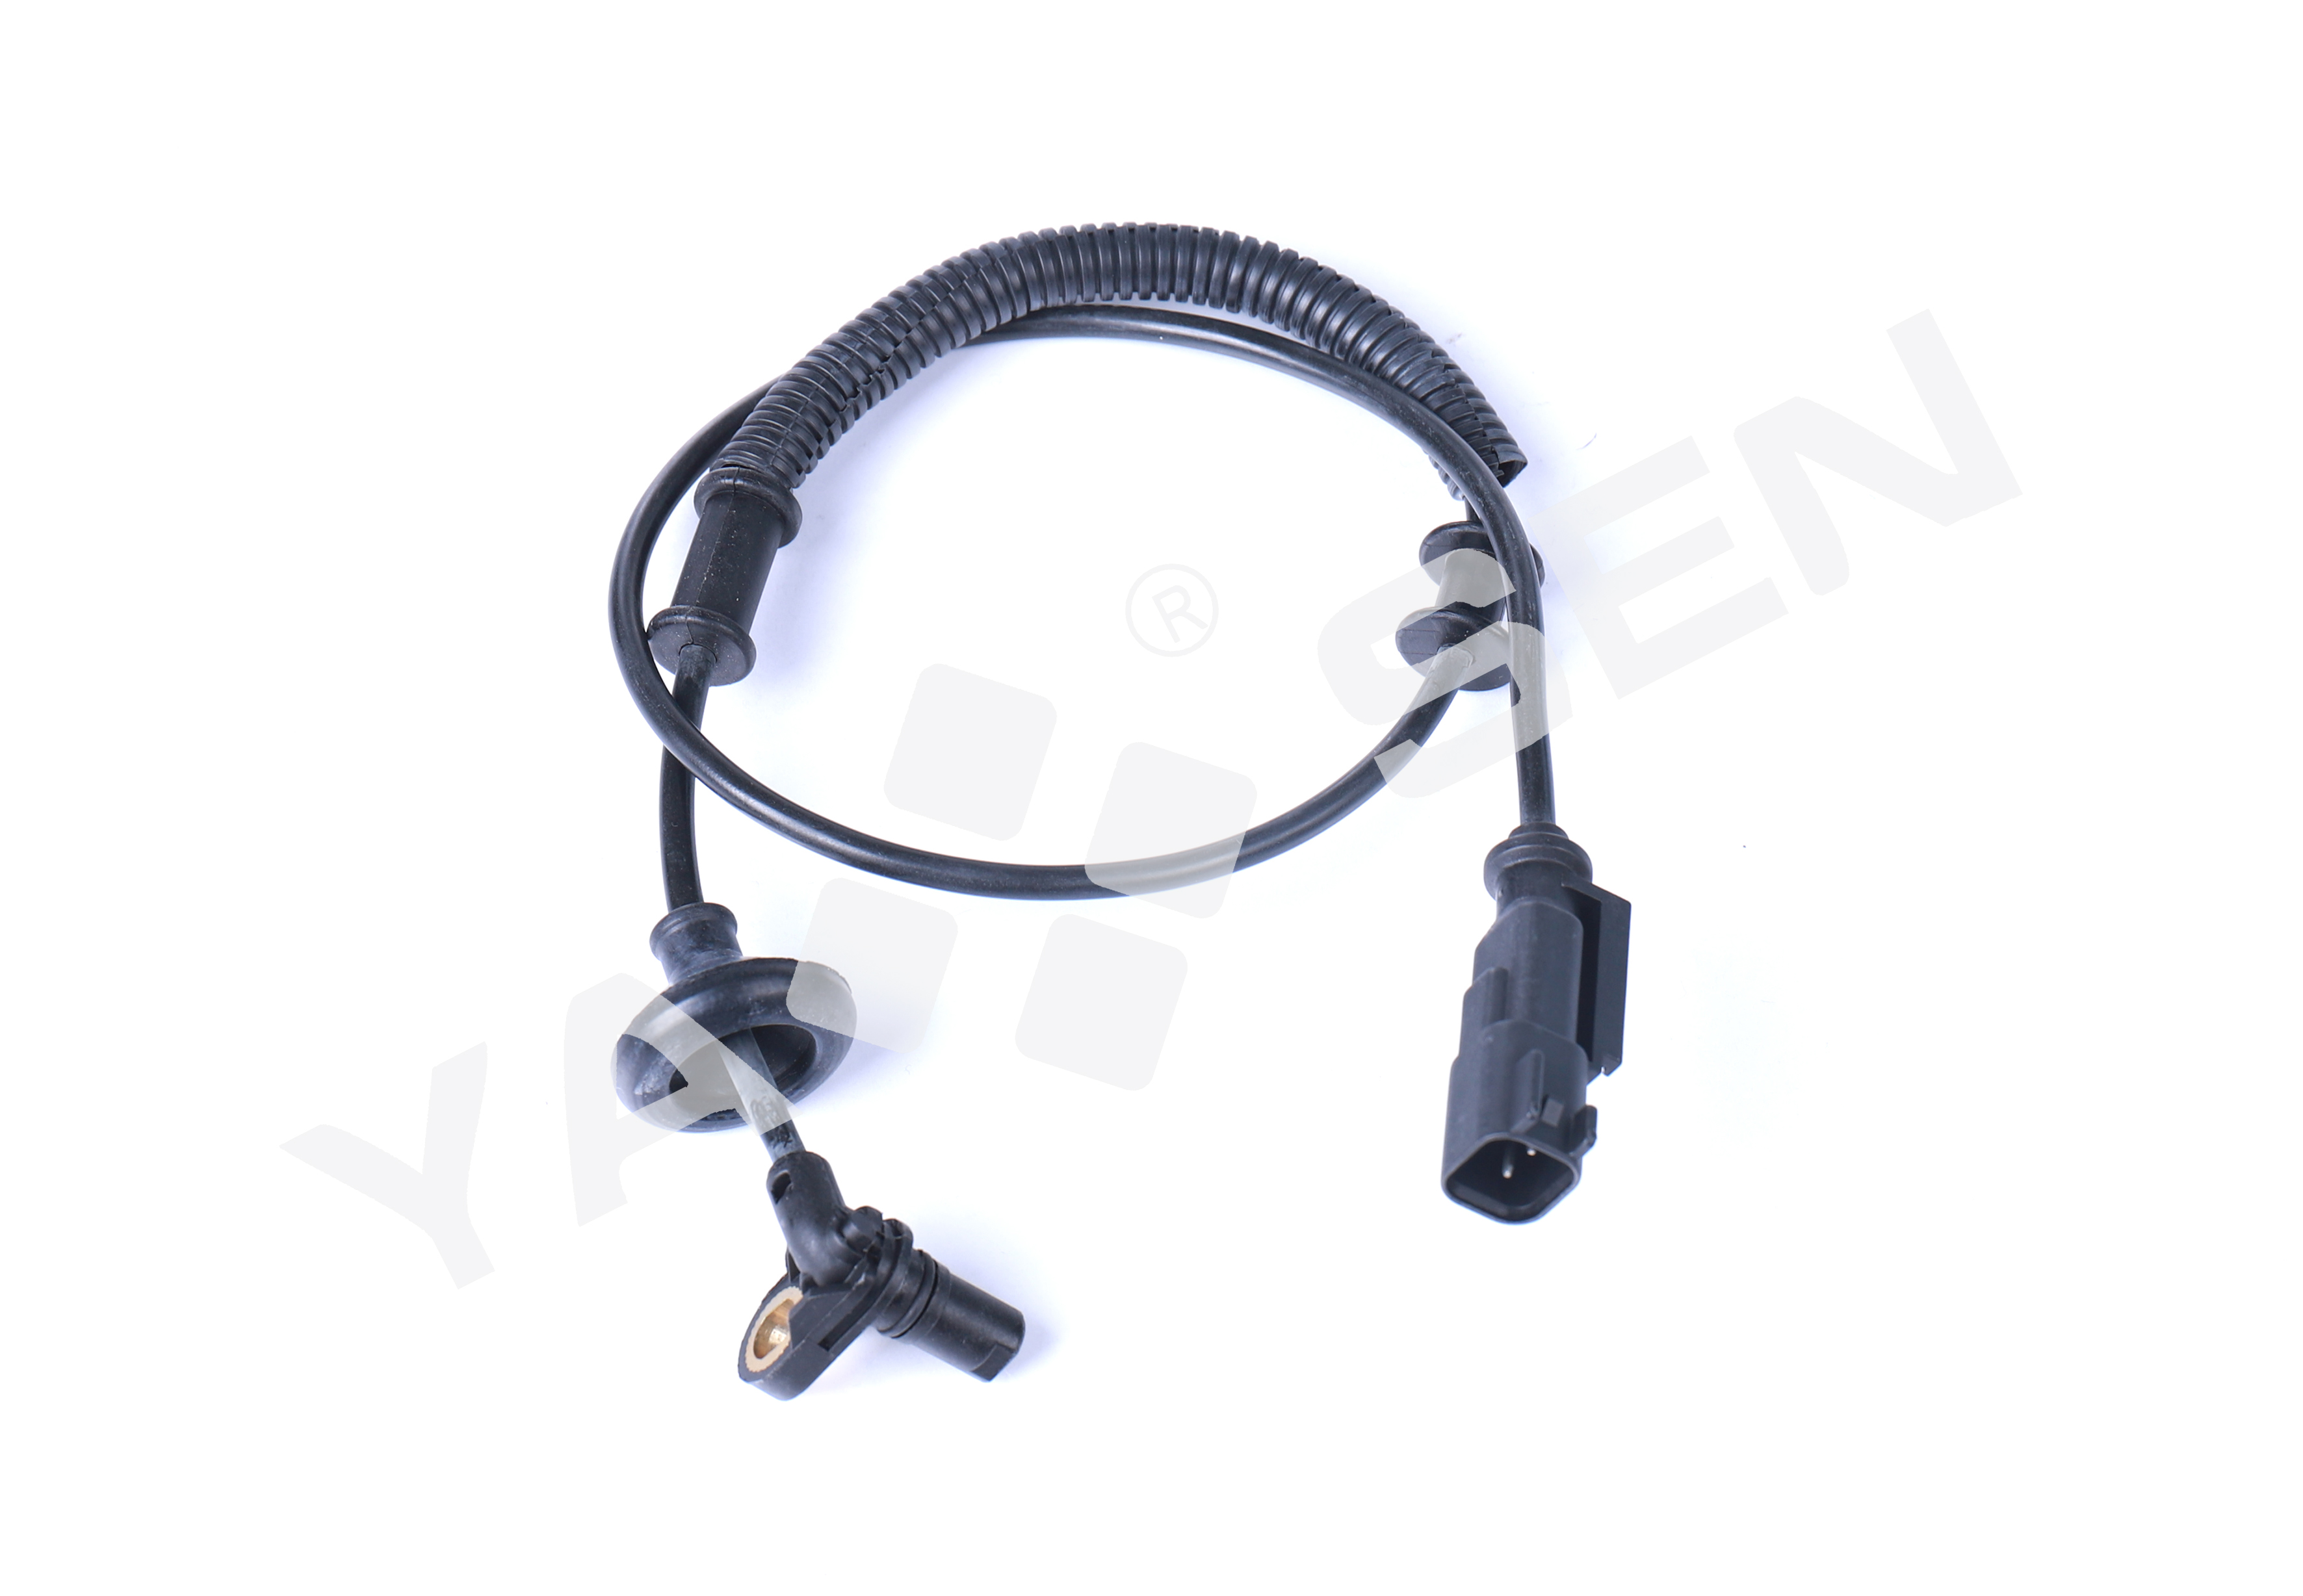 ABS Wheel Speed Sensor for CHEVROLET/FORD, BL1Z-2C190A 72-10956 SU13765 ALS2070 5S12347 ABS2163 BL1Z2C190A